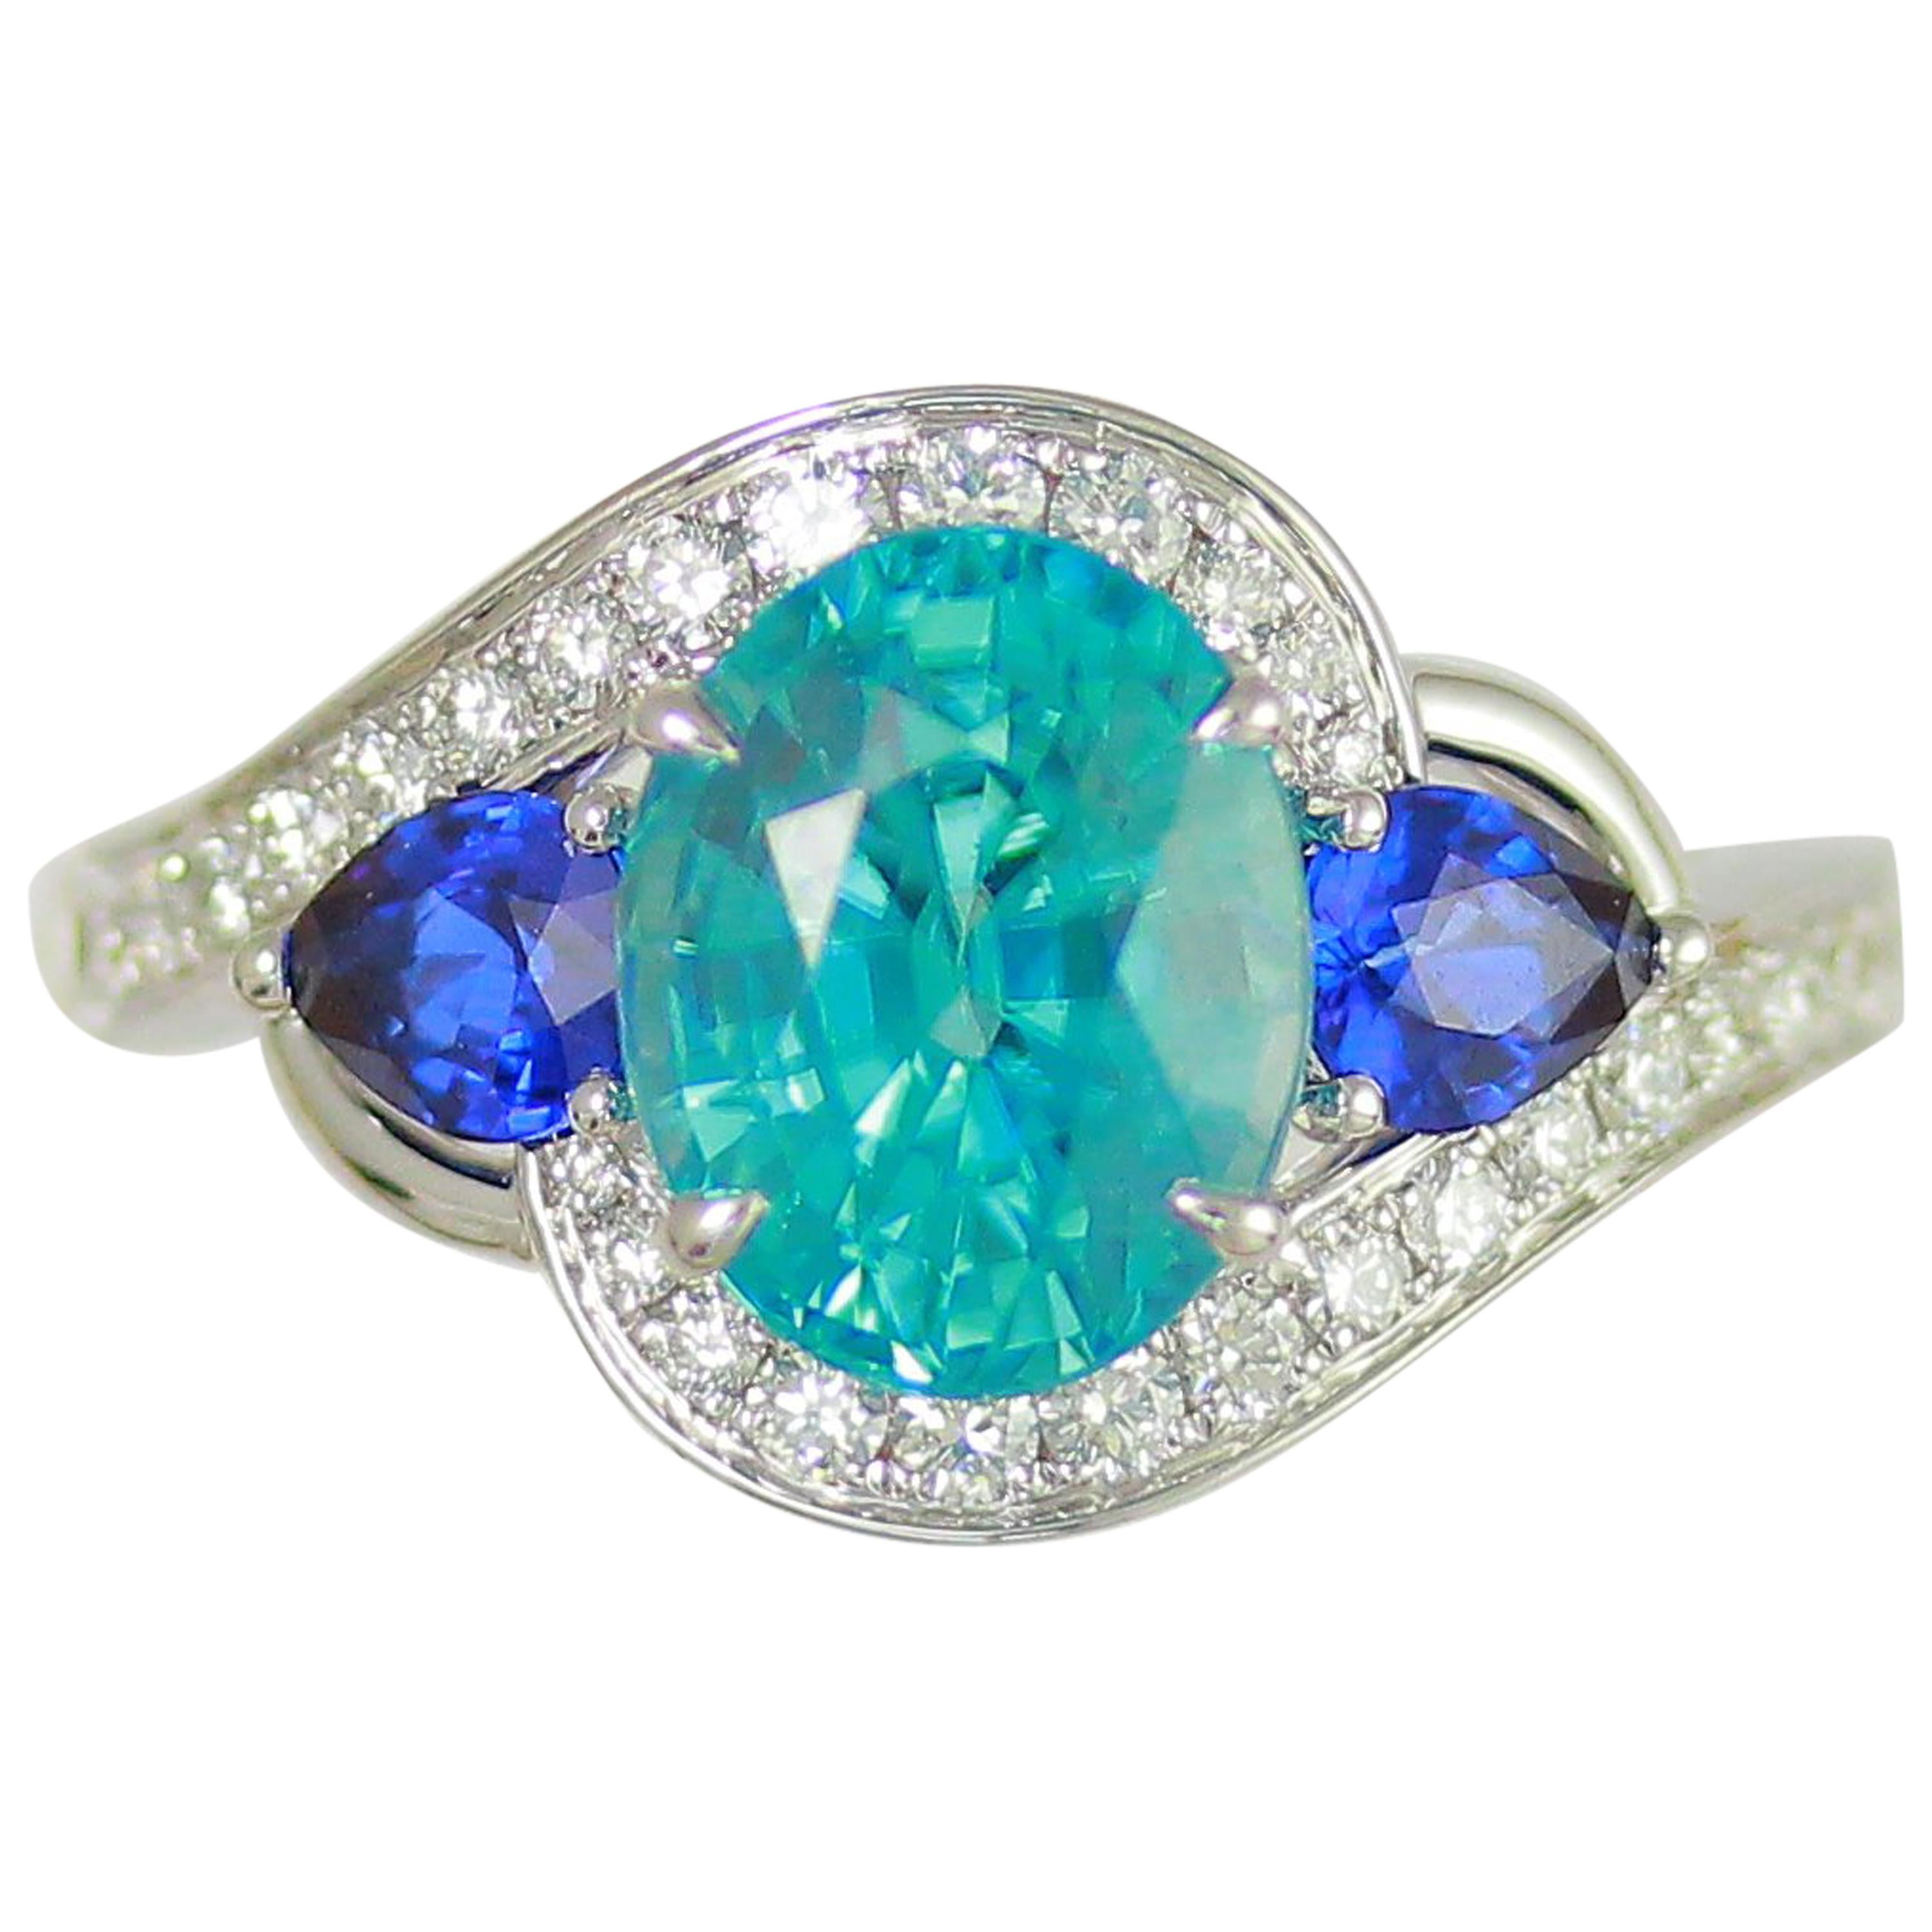 Frederic Sage 3.96 Carat Blue Zircon and Sapphire Cocktail Fashion Ring